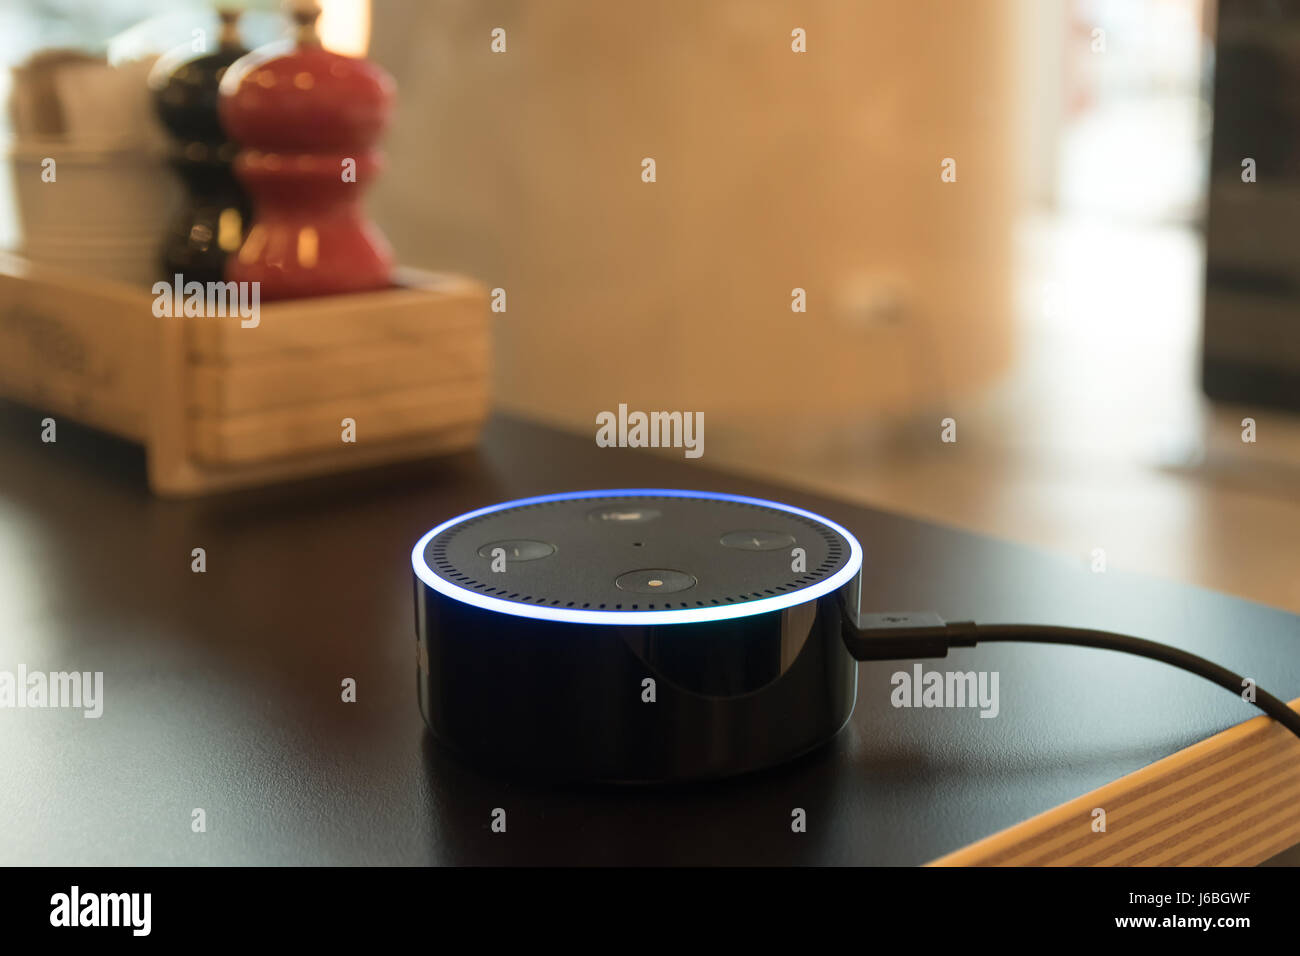 BANGKOK, THAILAND - Fabruary 2 : Selective focus on Amazon Echo dot version  2, the voice recognition streaming device from Amazon in coffee shop on Fa  Stock Photo - Alamy